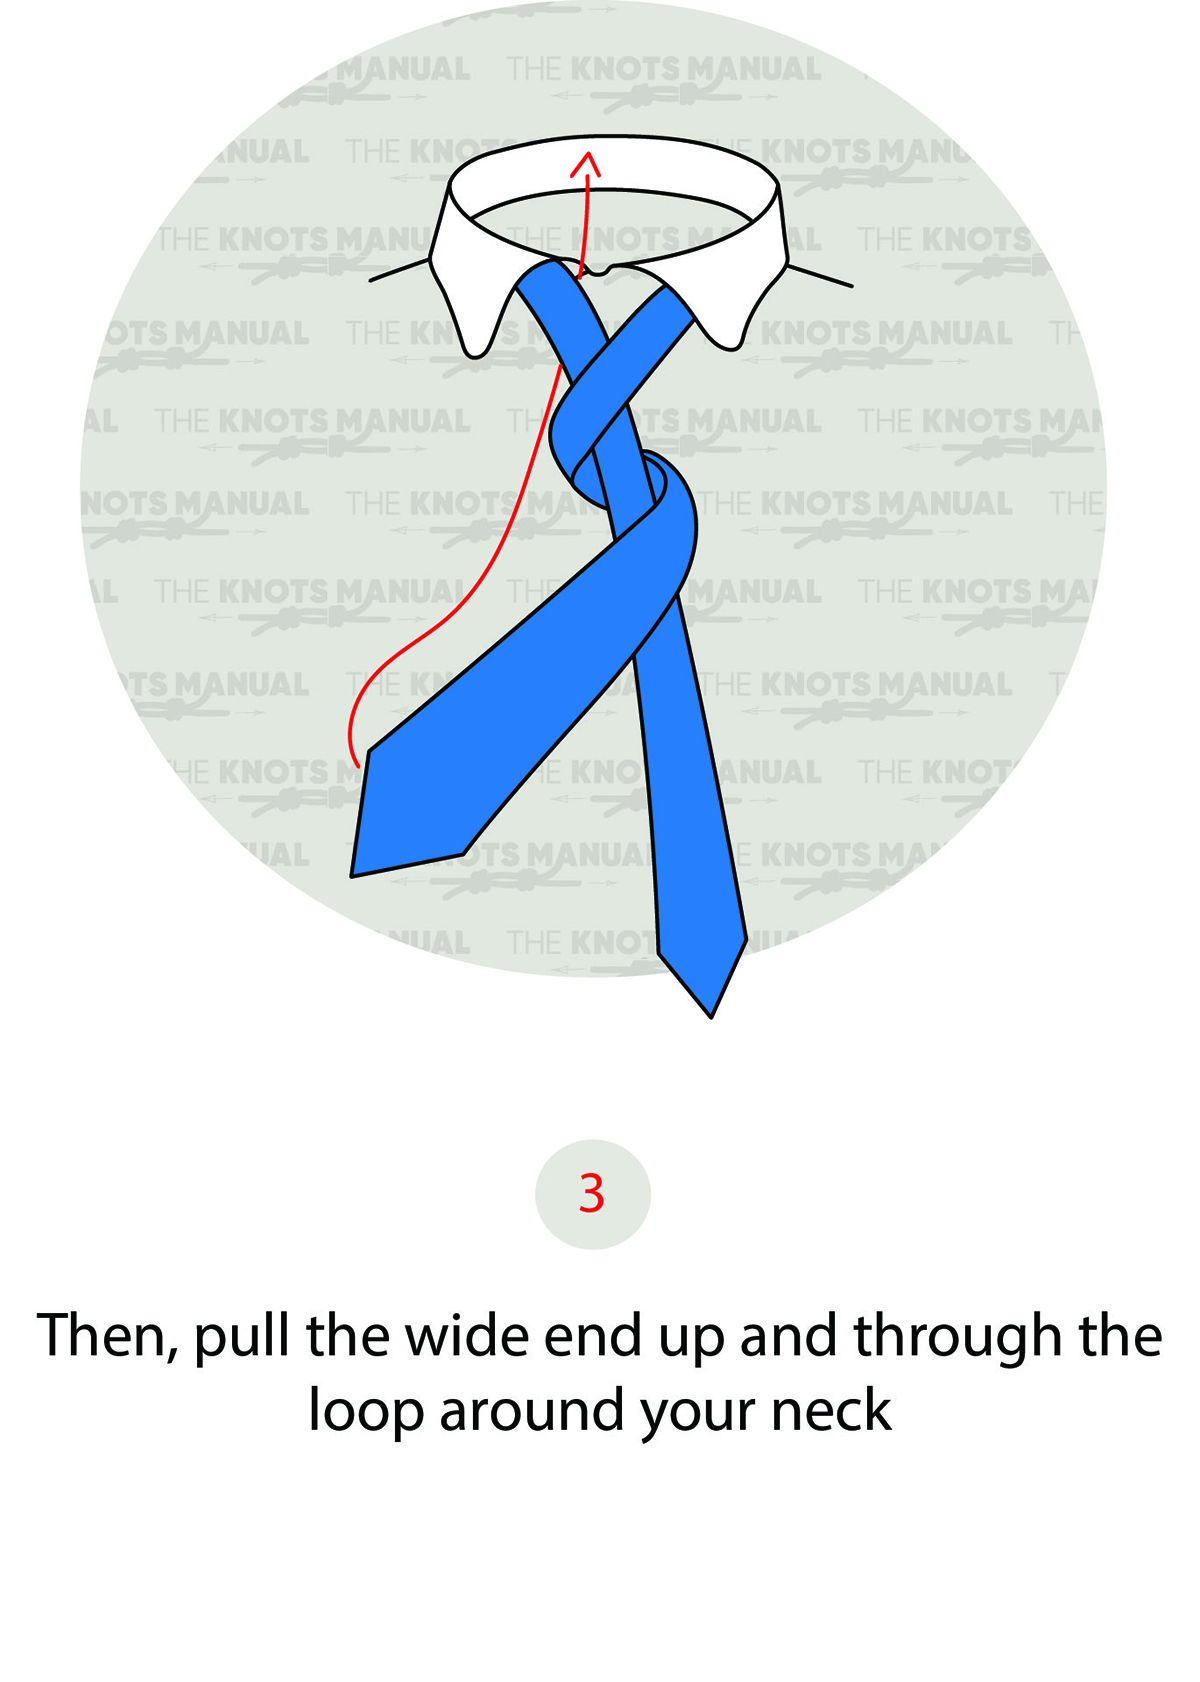 Four in hand tie knot step 3